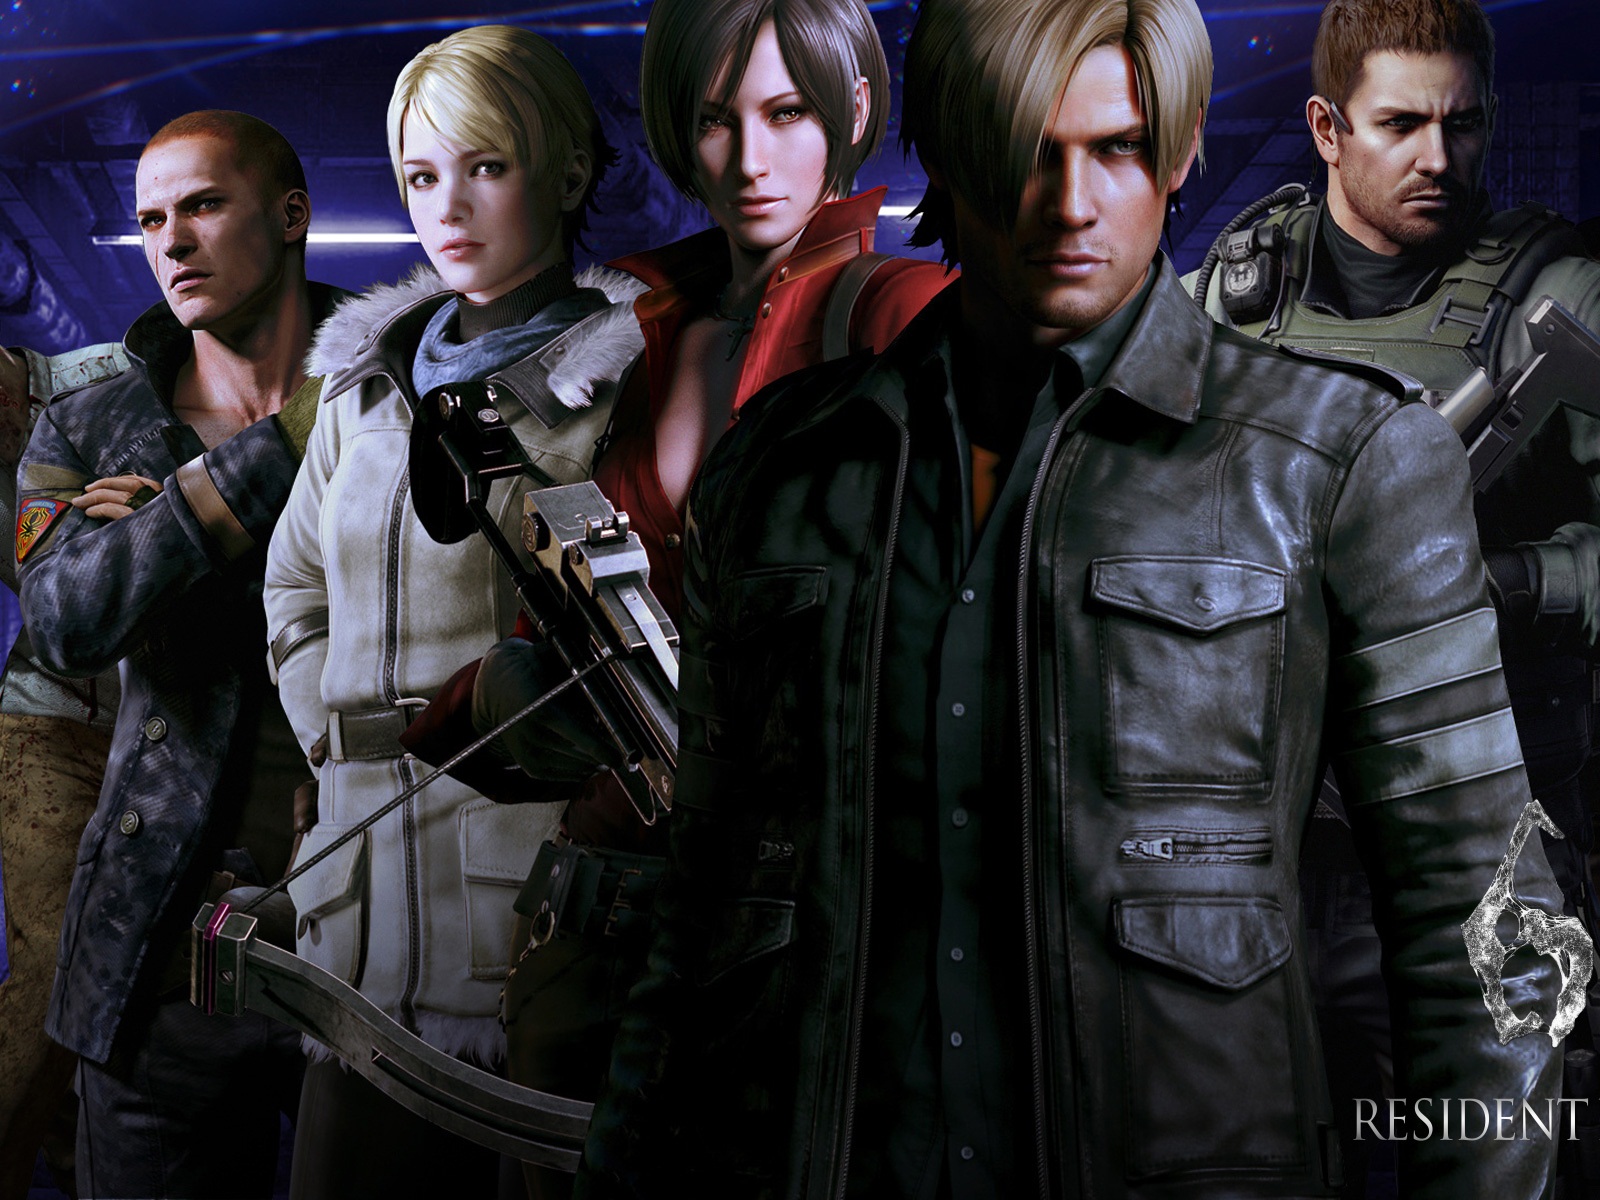 Resident Evil 6 HD game wallpapers #10 - 1600x1200